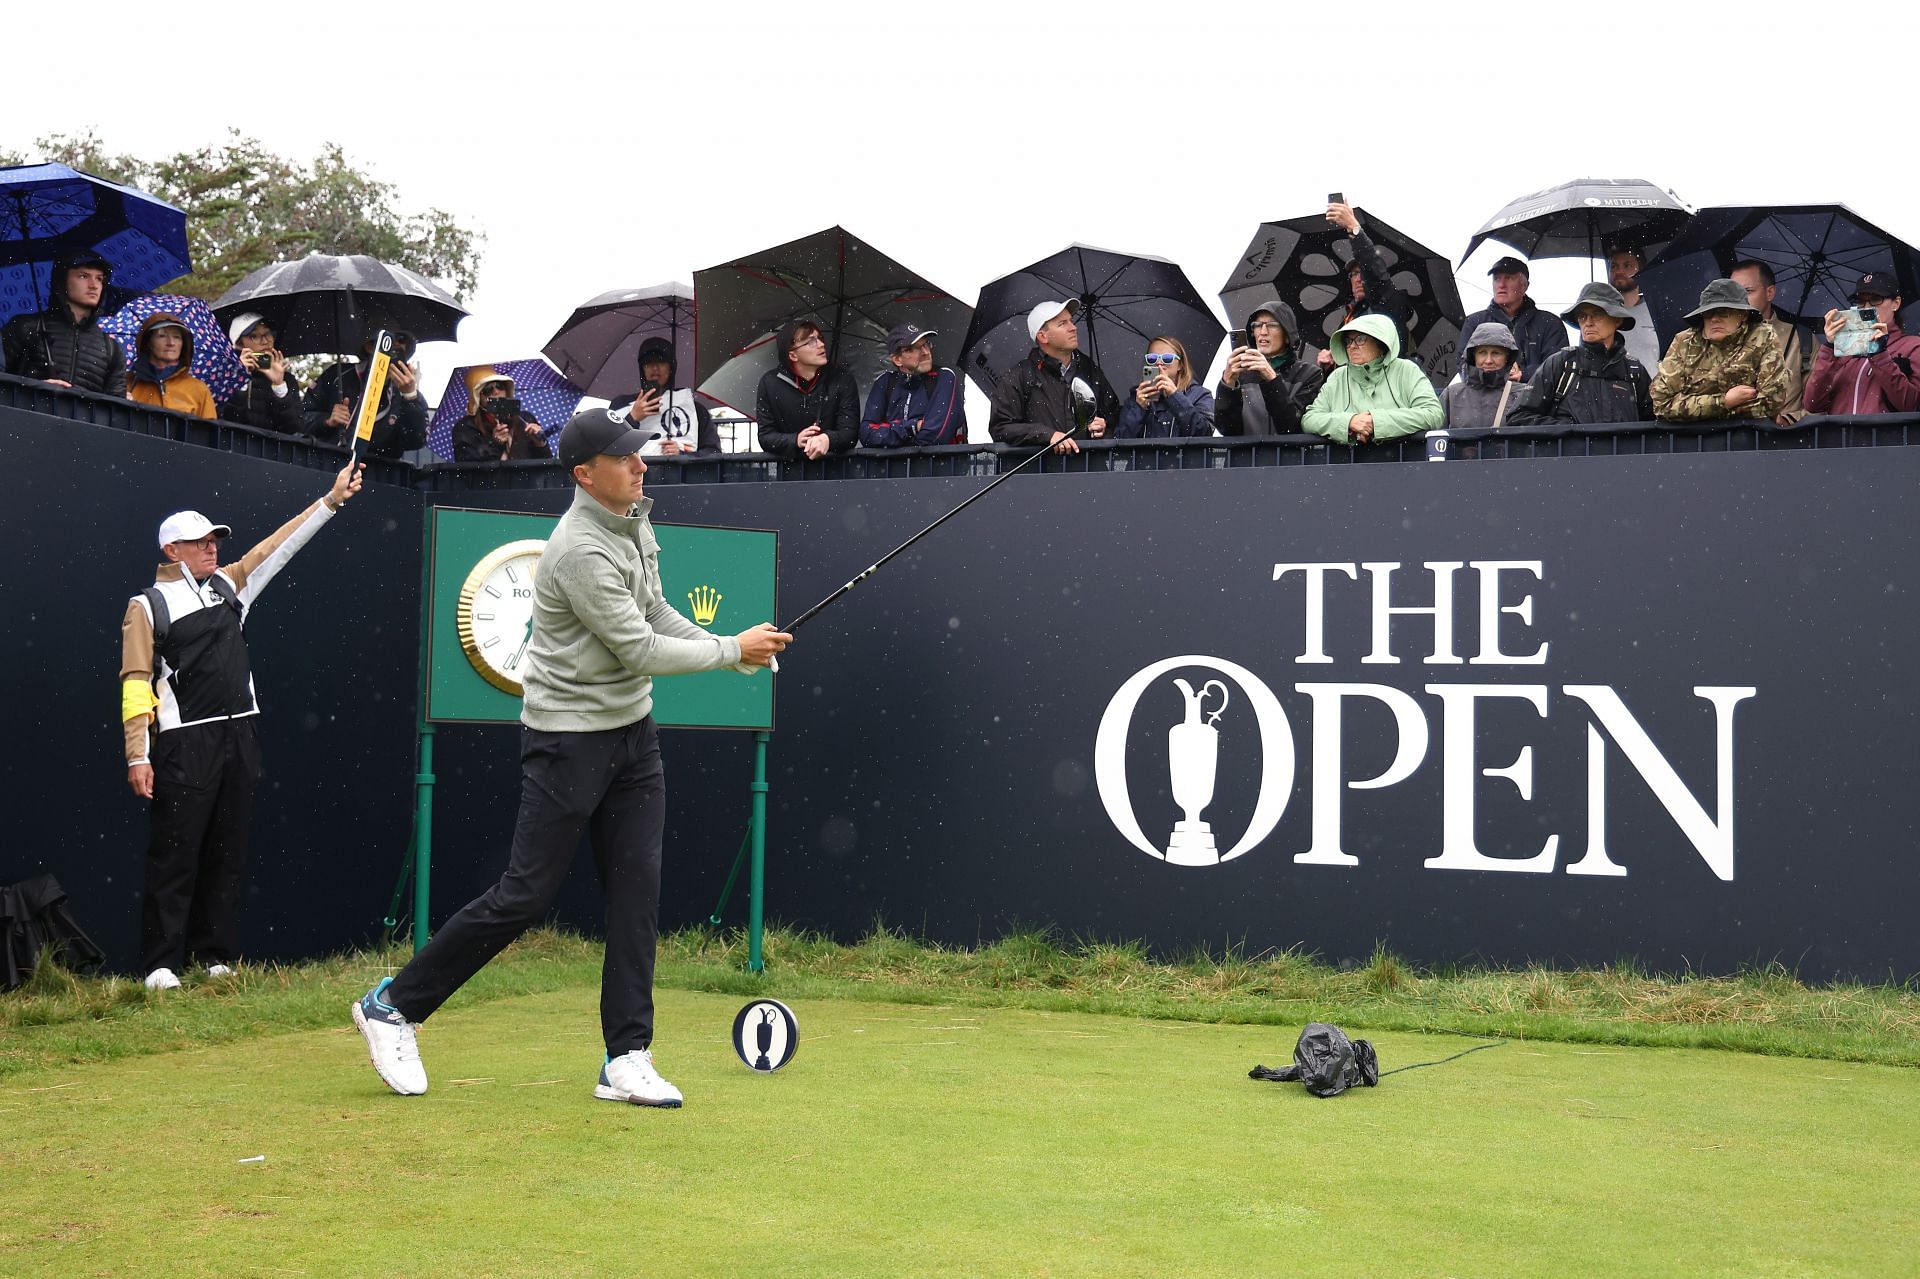 The 151st Open - Preview Day Two